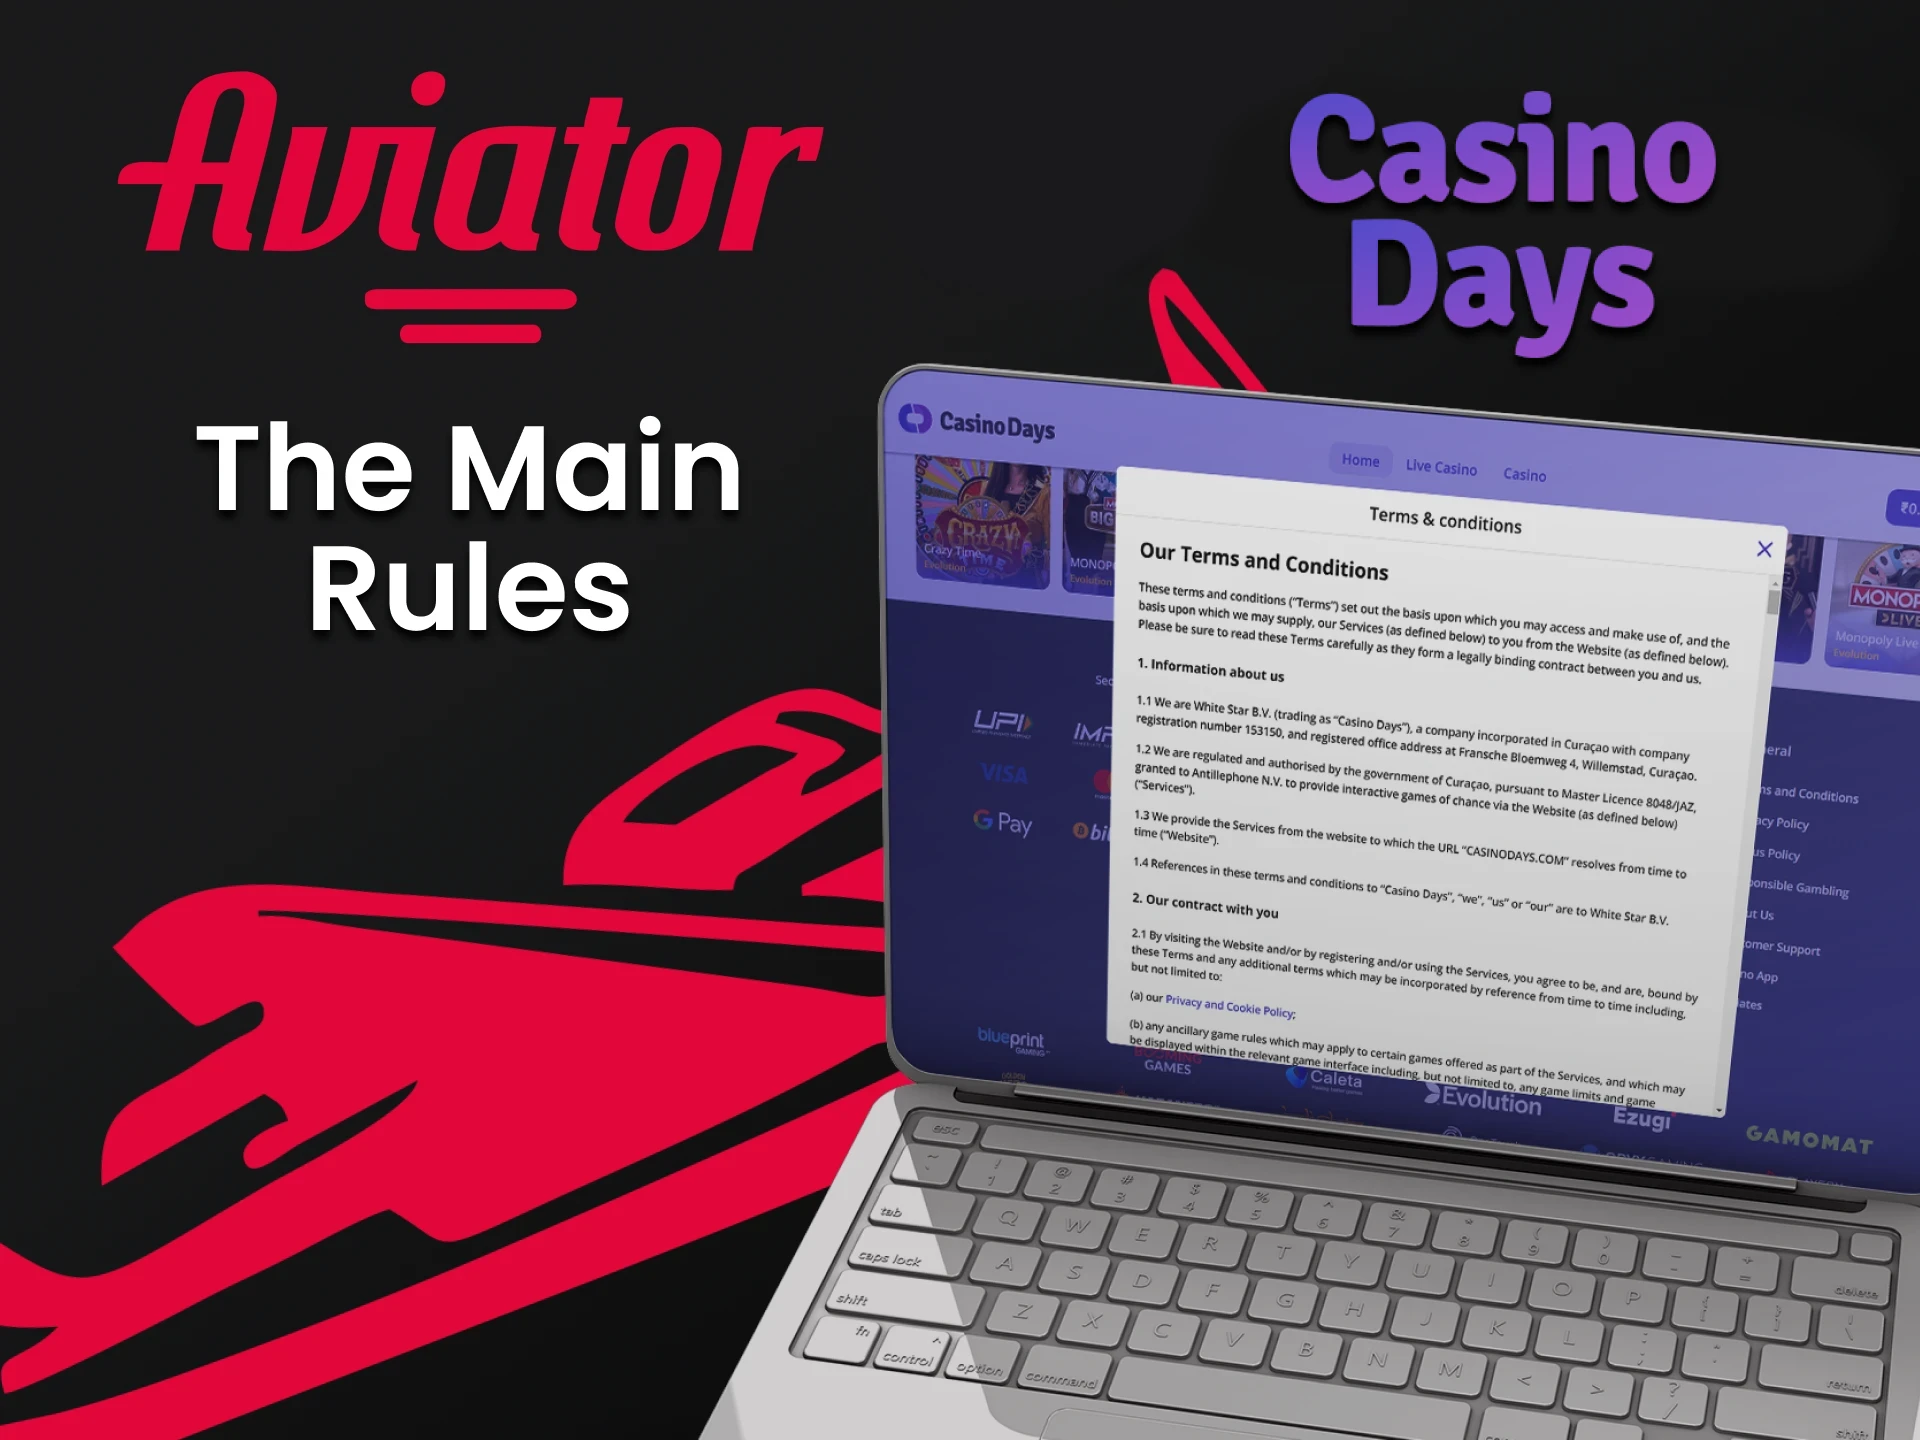 Learn the rules of the Casino Days service for playing Aviator.